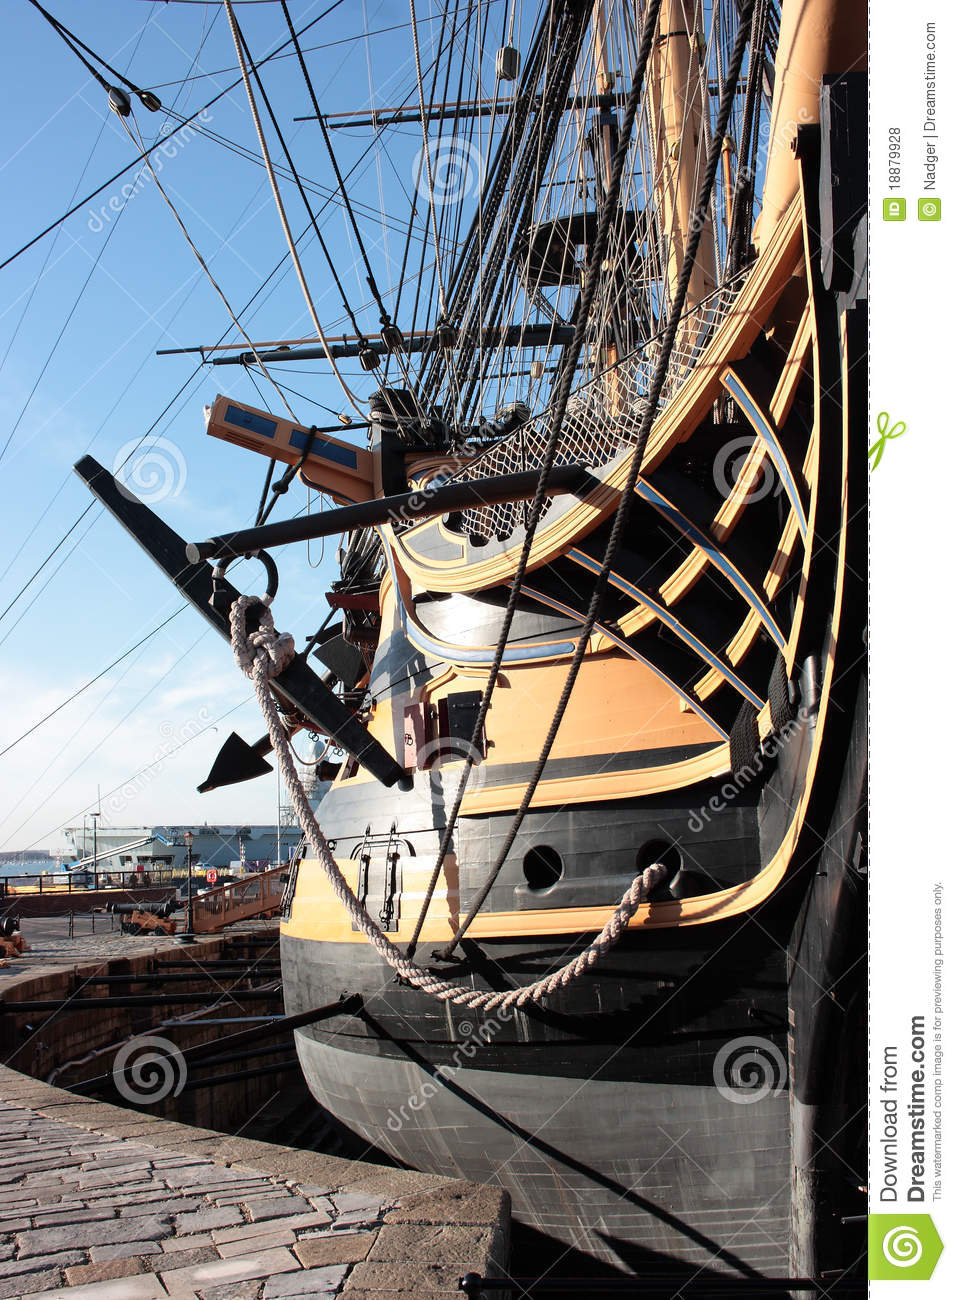 Front View Of Hms Victory Royalty Free Stock Photos   Image  18879928